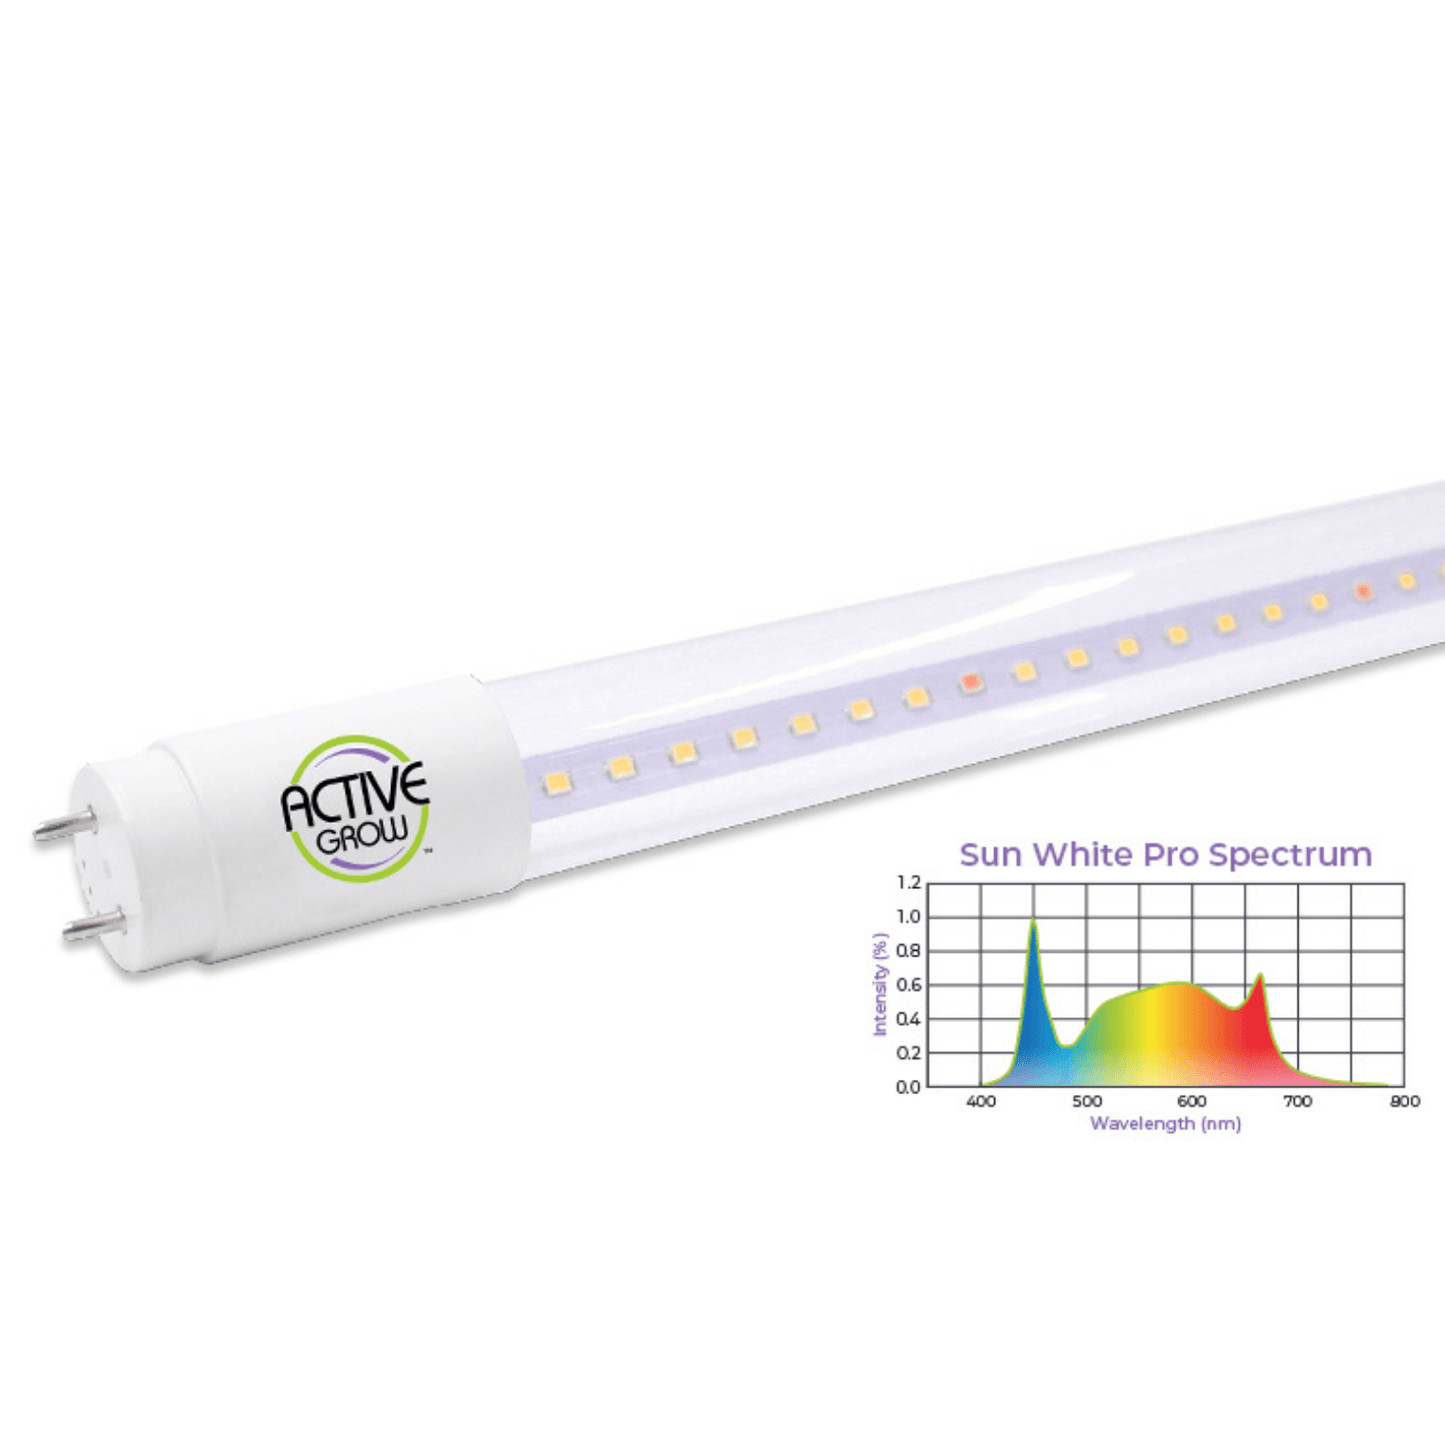 Active Grow 22W T8 HO 4FT Horticultural Lamp - Sun White Pro Spectrum AG/22T8BB/4FT/PS/4 Grow Lights 090952347476